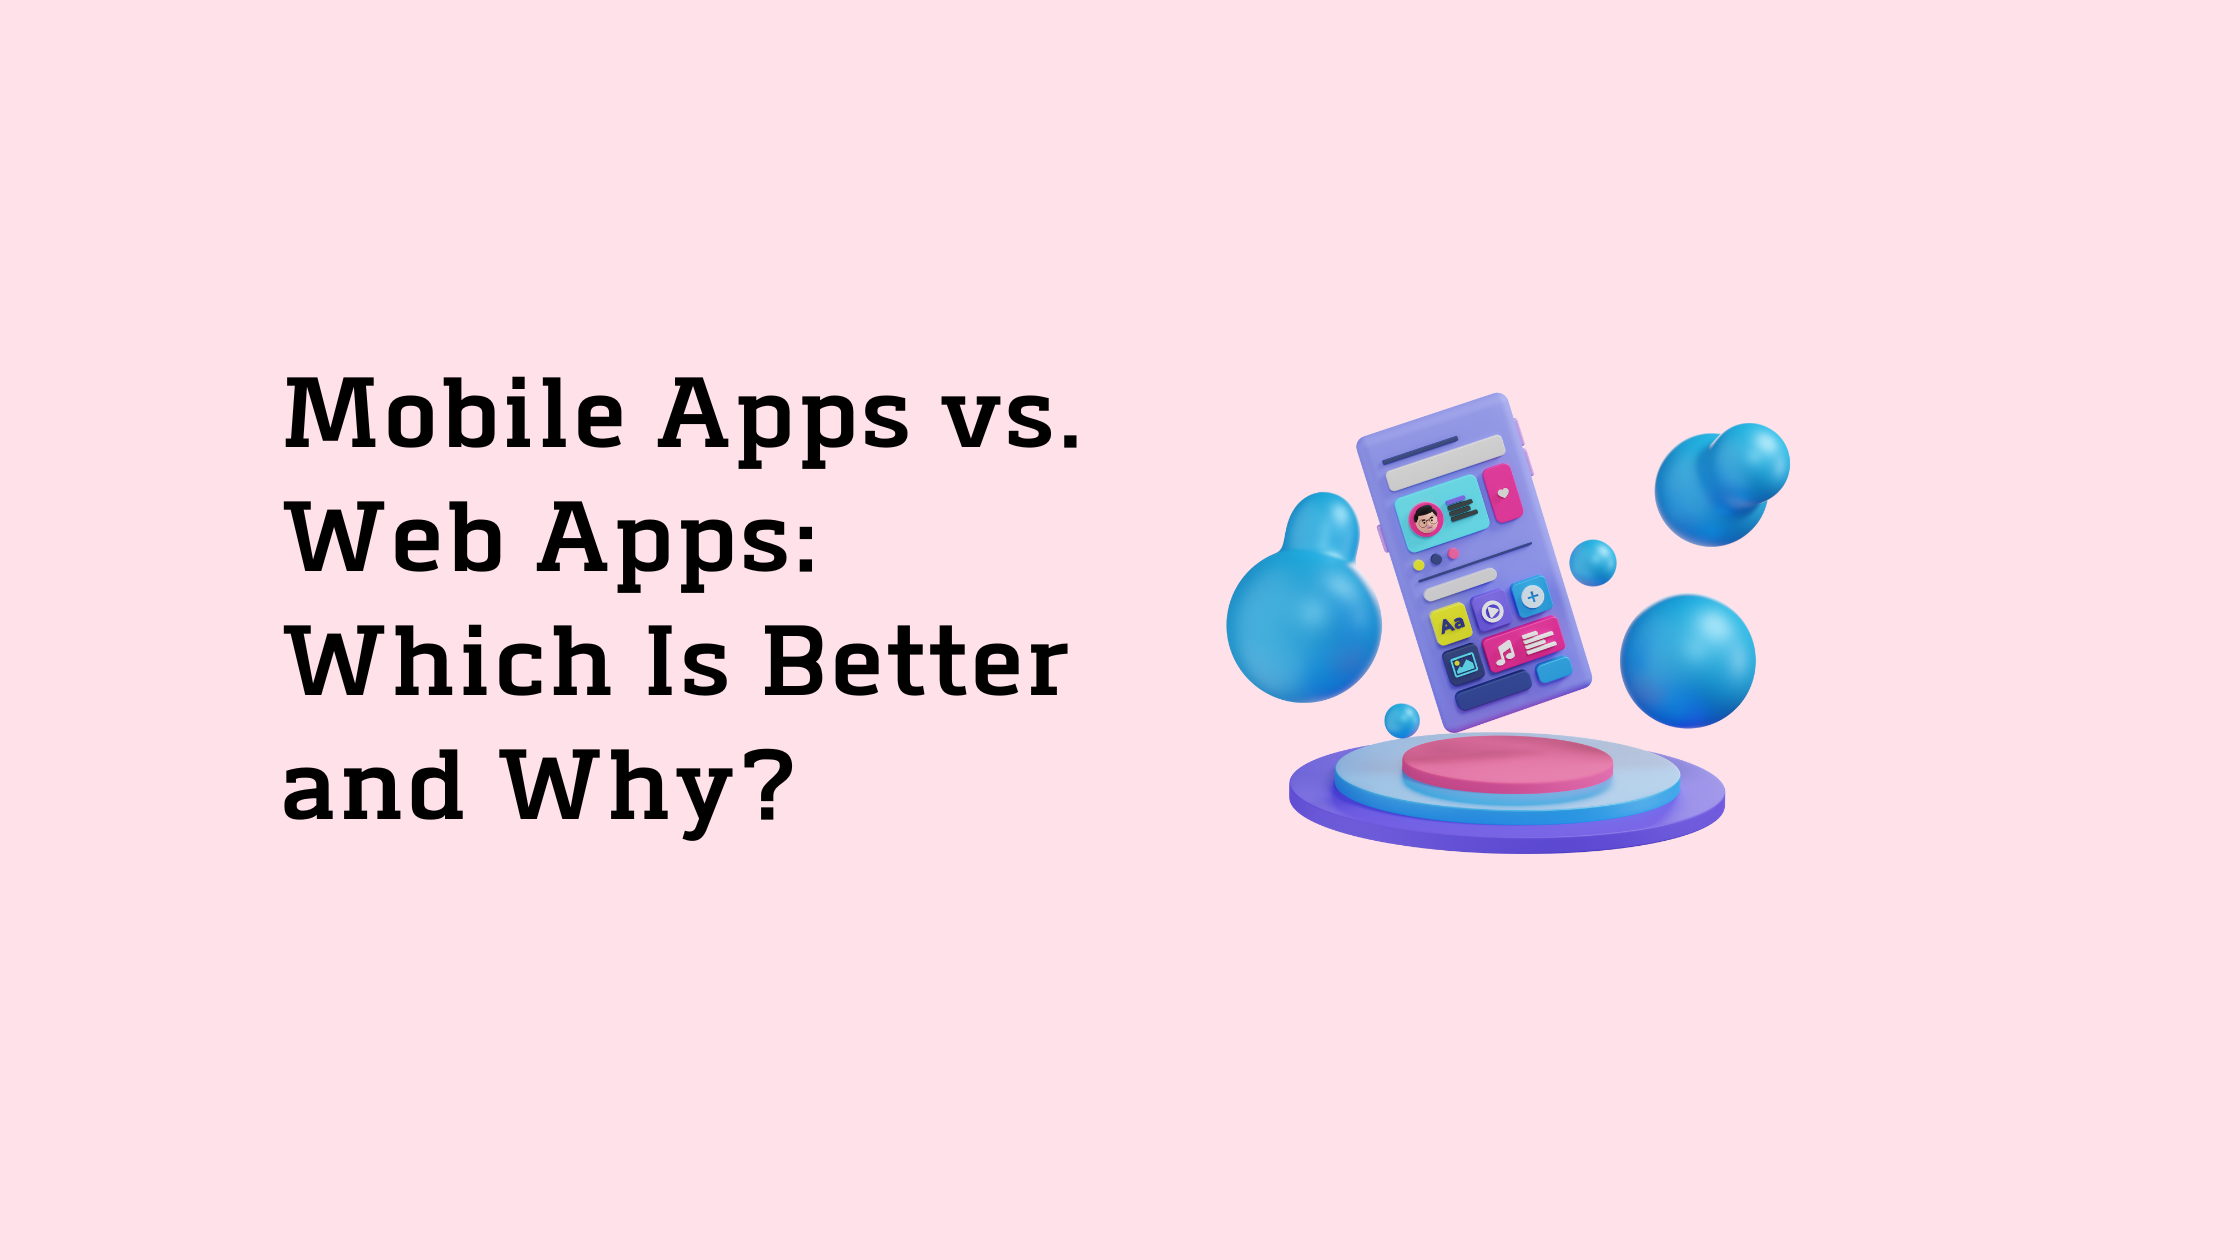 Mobile Apps vs. Web Apps Which Is Better and Why